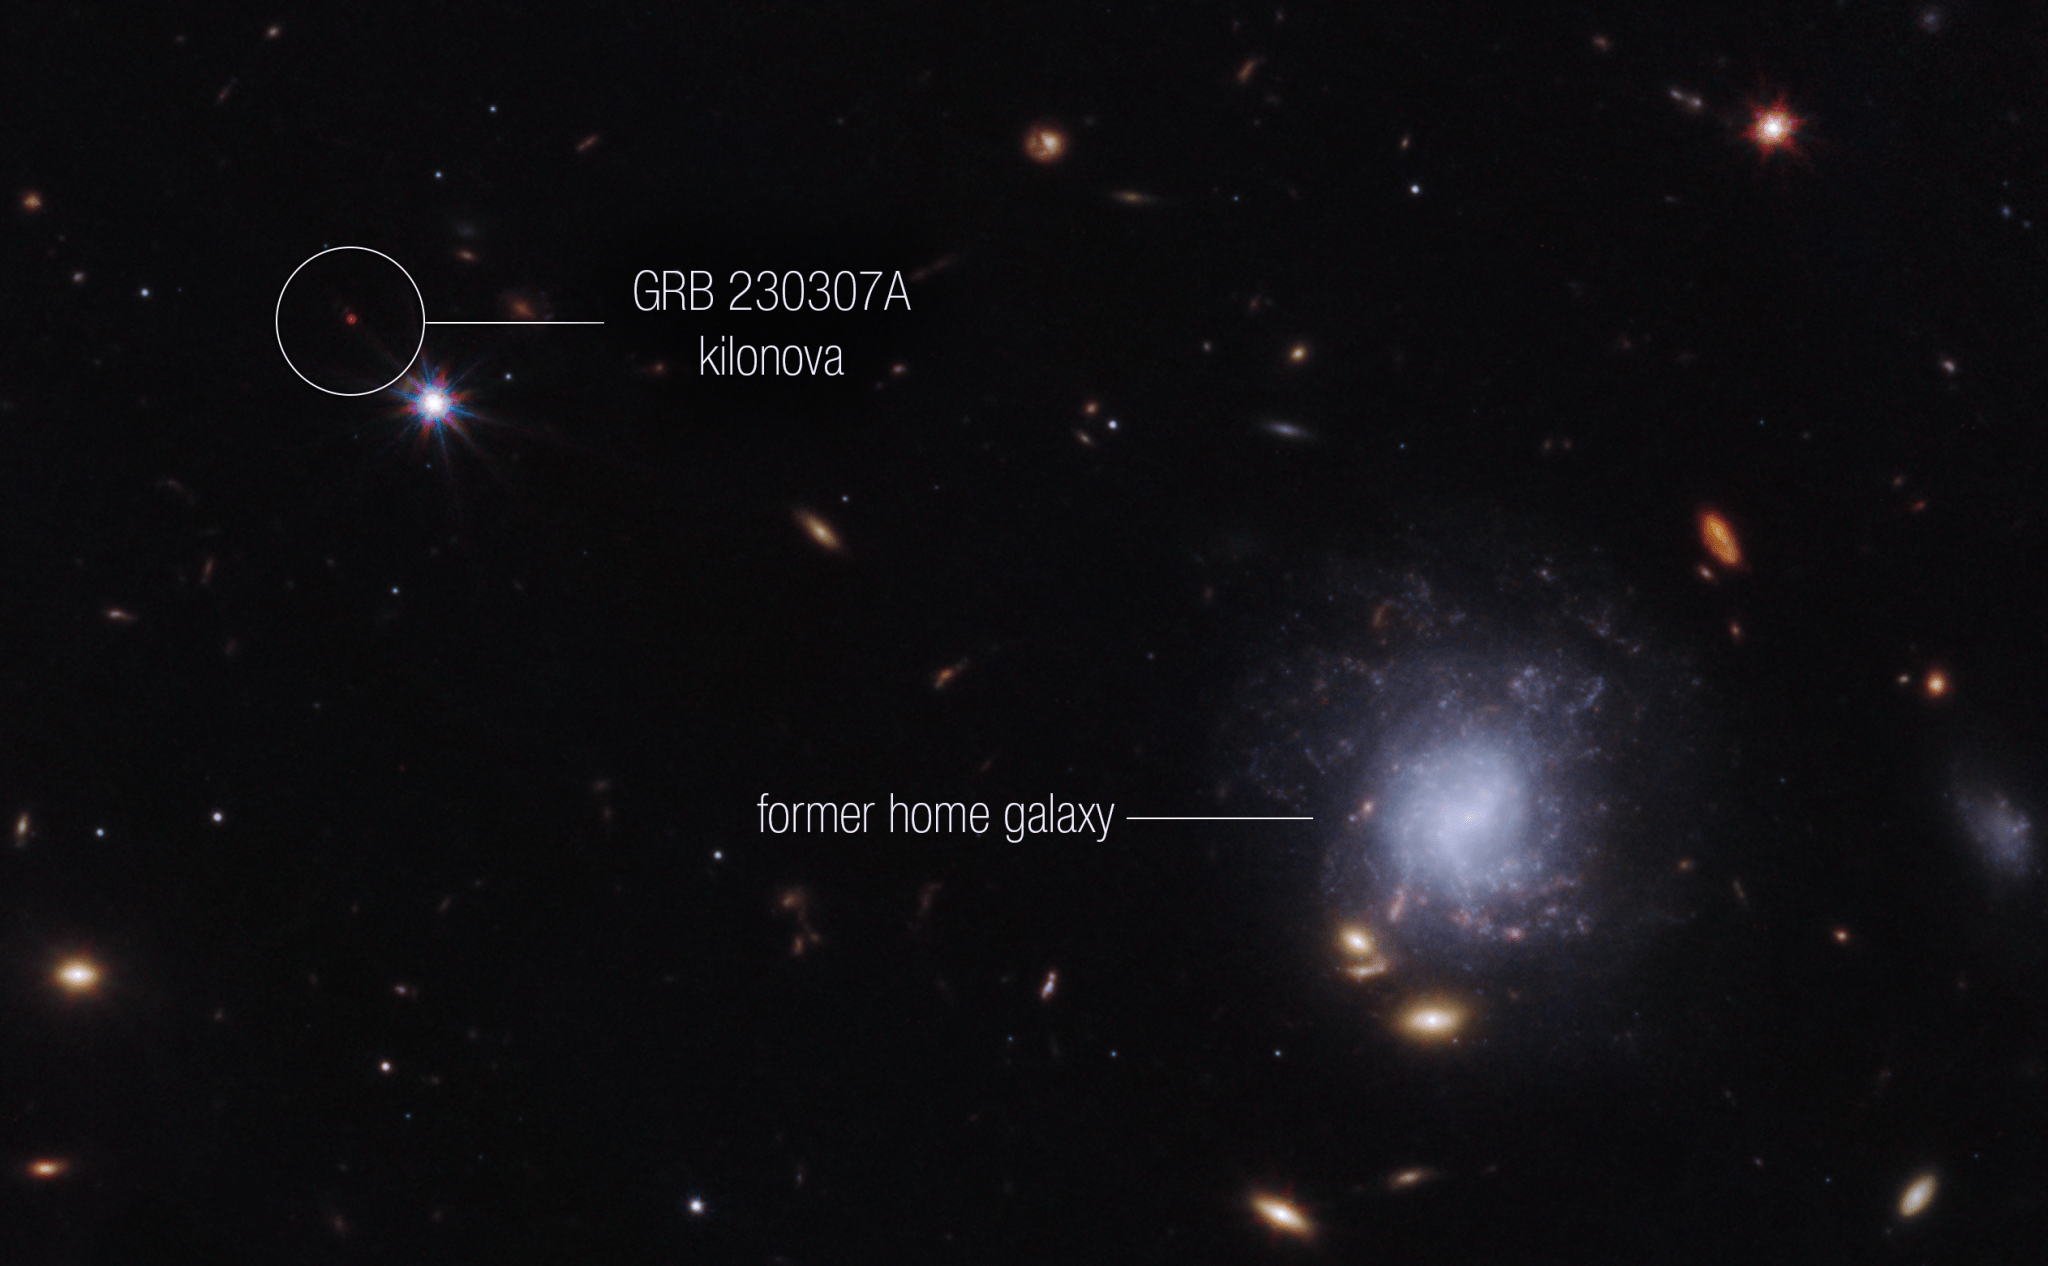 Bright galaxies and other light sources in various sizes and shapes are scattered across a black swath of space: small points, hazy elliptical-like smudges with halos, and spiral-shaped blobs. The objects vary in color: white, blue-white, yellow-white, and orange-red. Toward the center right is a blue-white spiral galaxy seen face-on that is larger than the other light sources in the image. The galaxy is labeled “former home galaxy.” Toward the upper left is a small red point, which has a white circle around it and is labeled “GRB 230307A kilonova.”